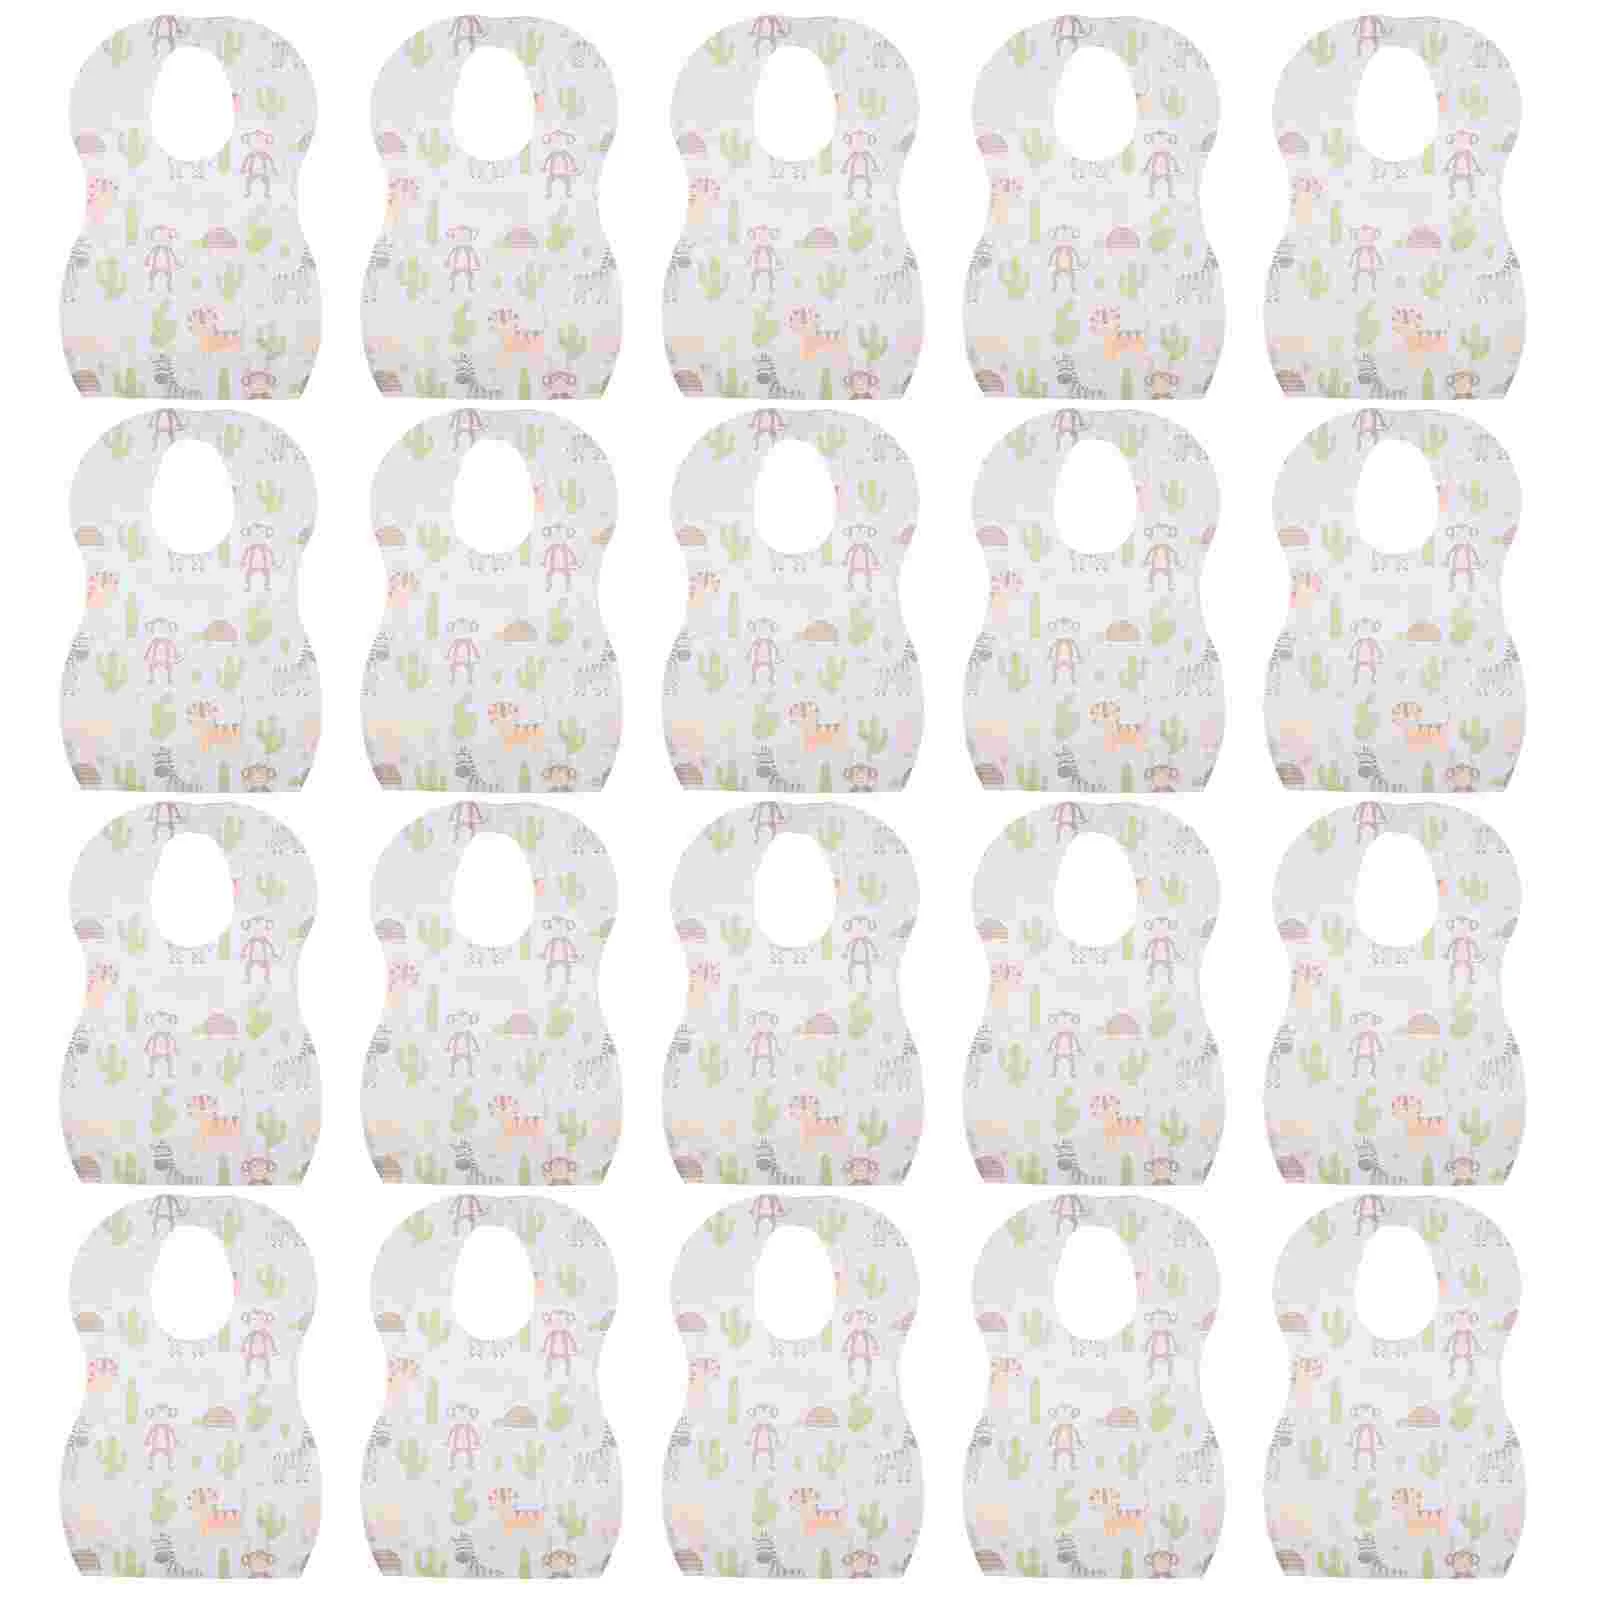 

20 Pcs Baby Bib Toddler Feeding Clothes Bibs Disposable Eating Non-woven Fabric Apron Kids Highchairs